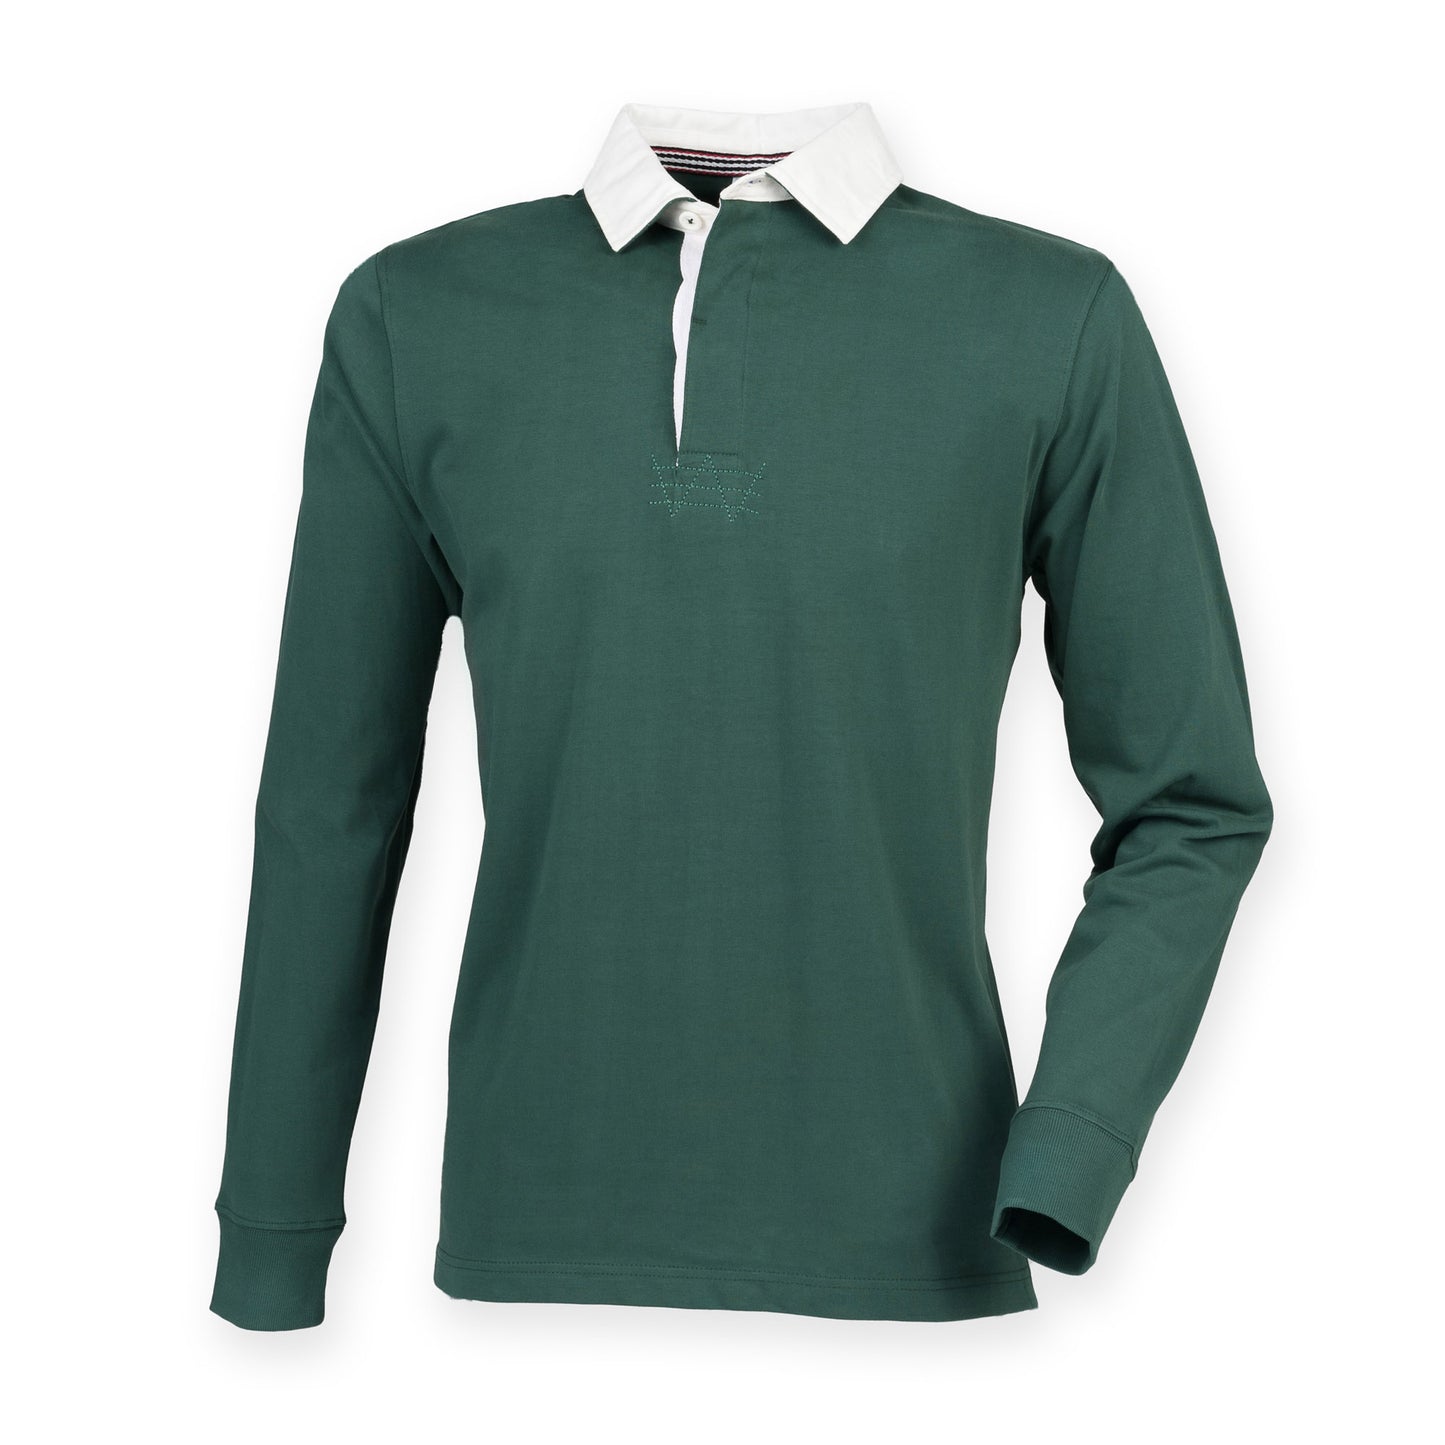 'New Style' Brushed Cotton Rugby Shirt with SOC Logo - Bottle Green